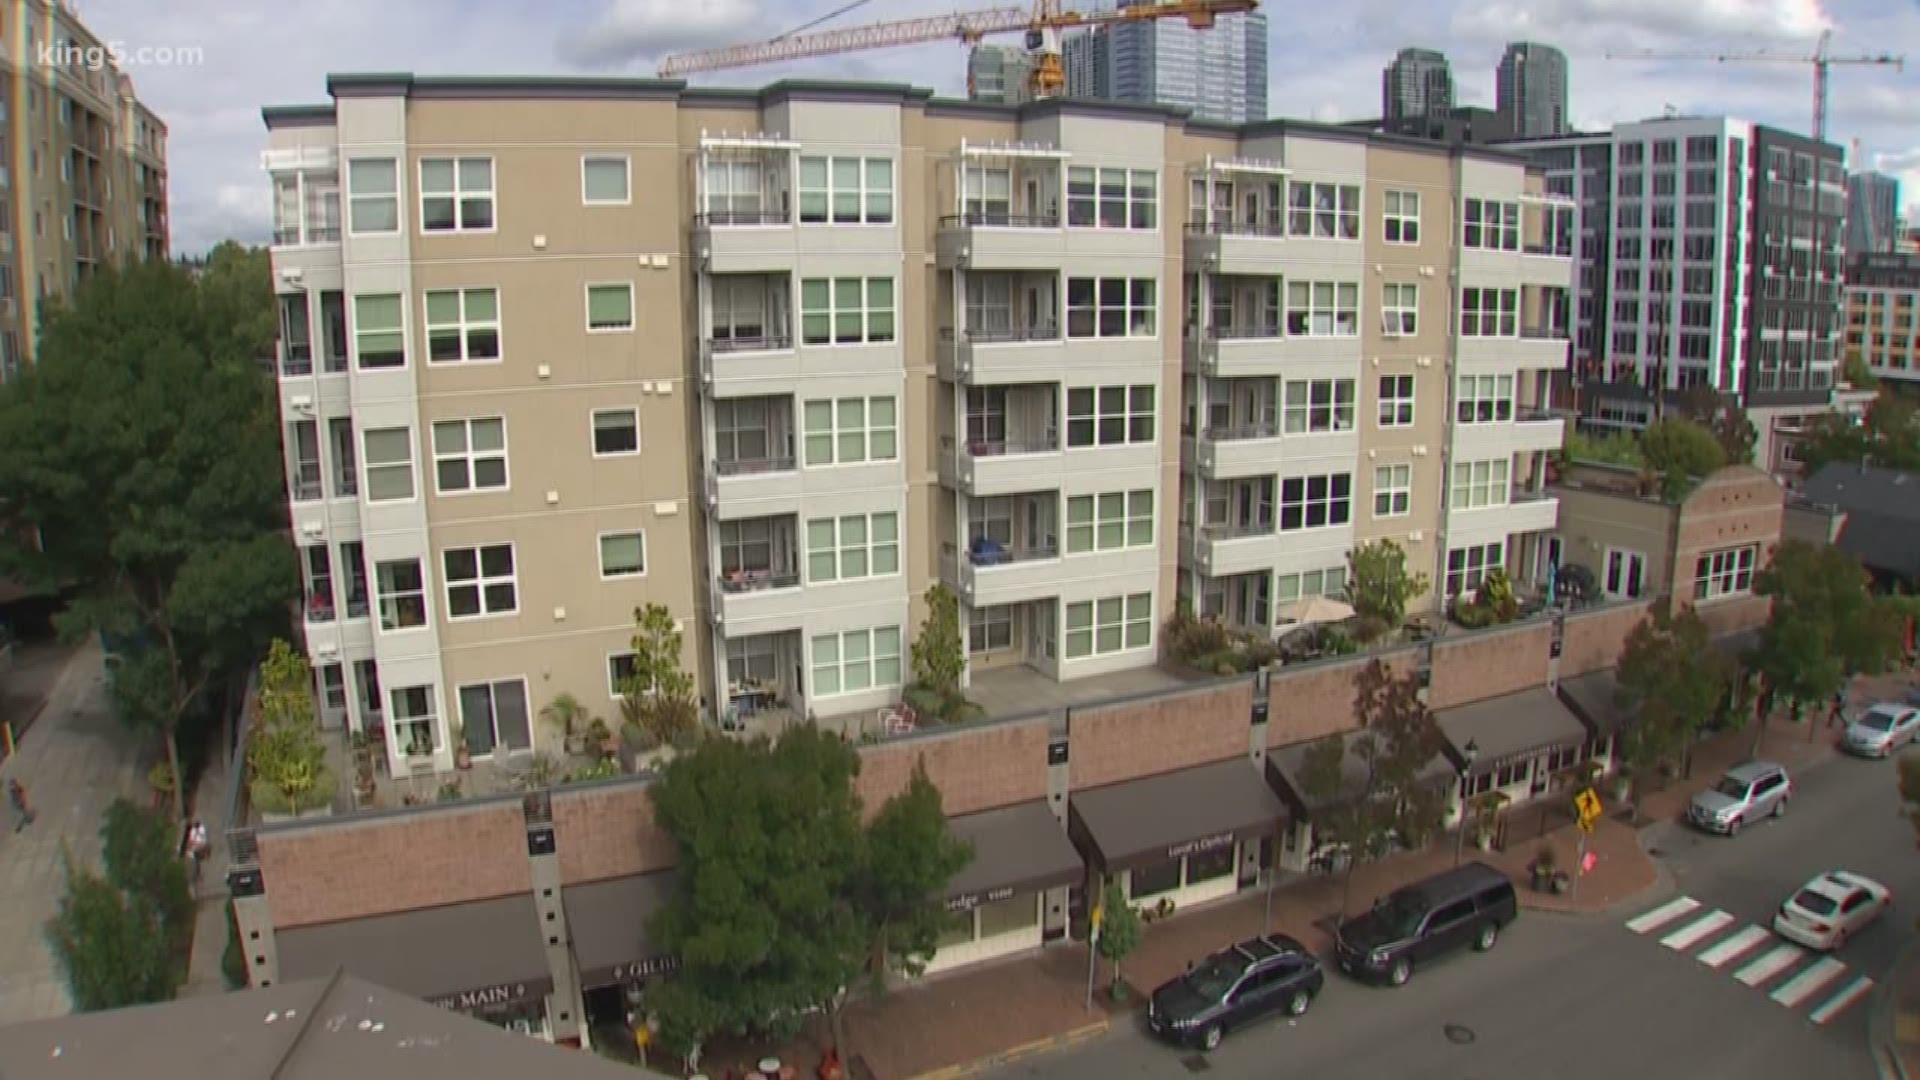 Records show more people may be violating the housing rules within one of King County's largest affordable housing programs.